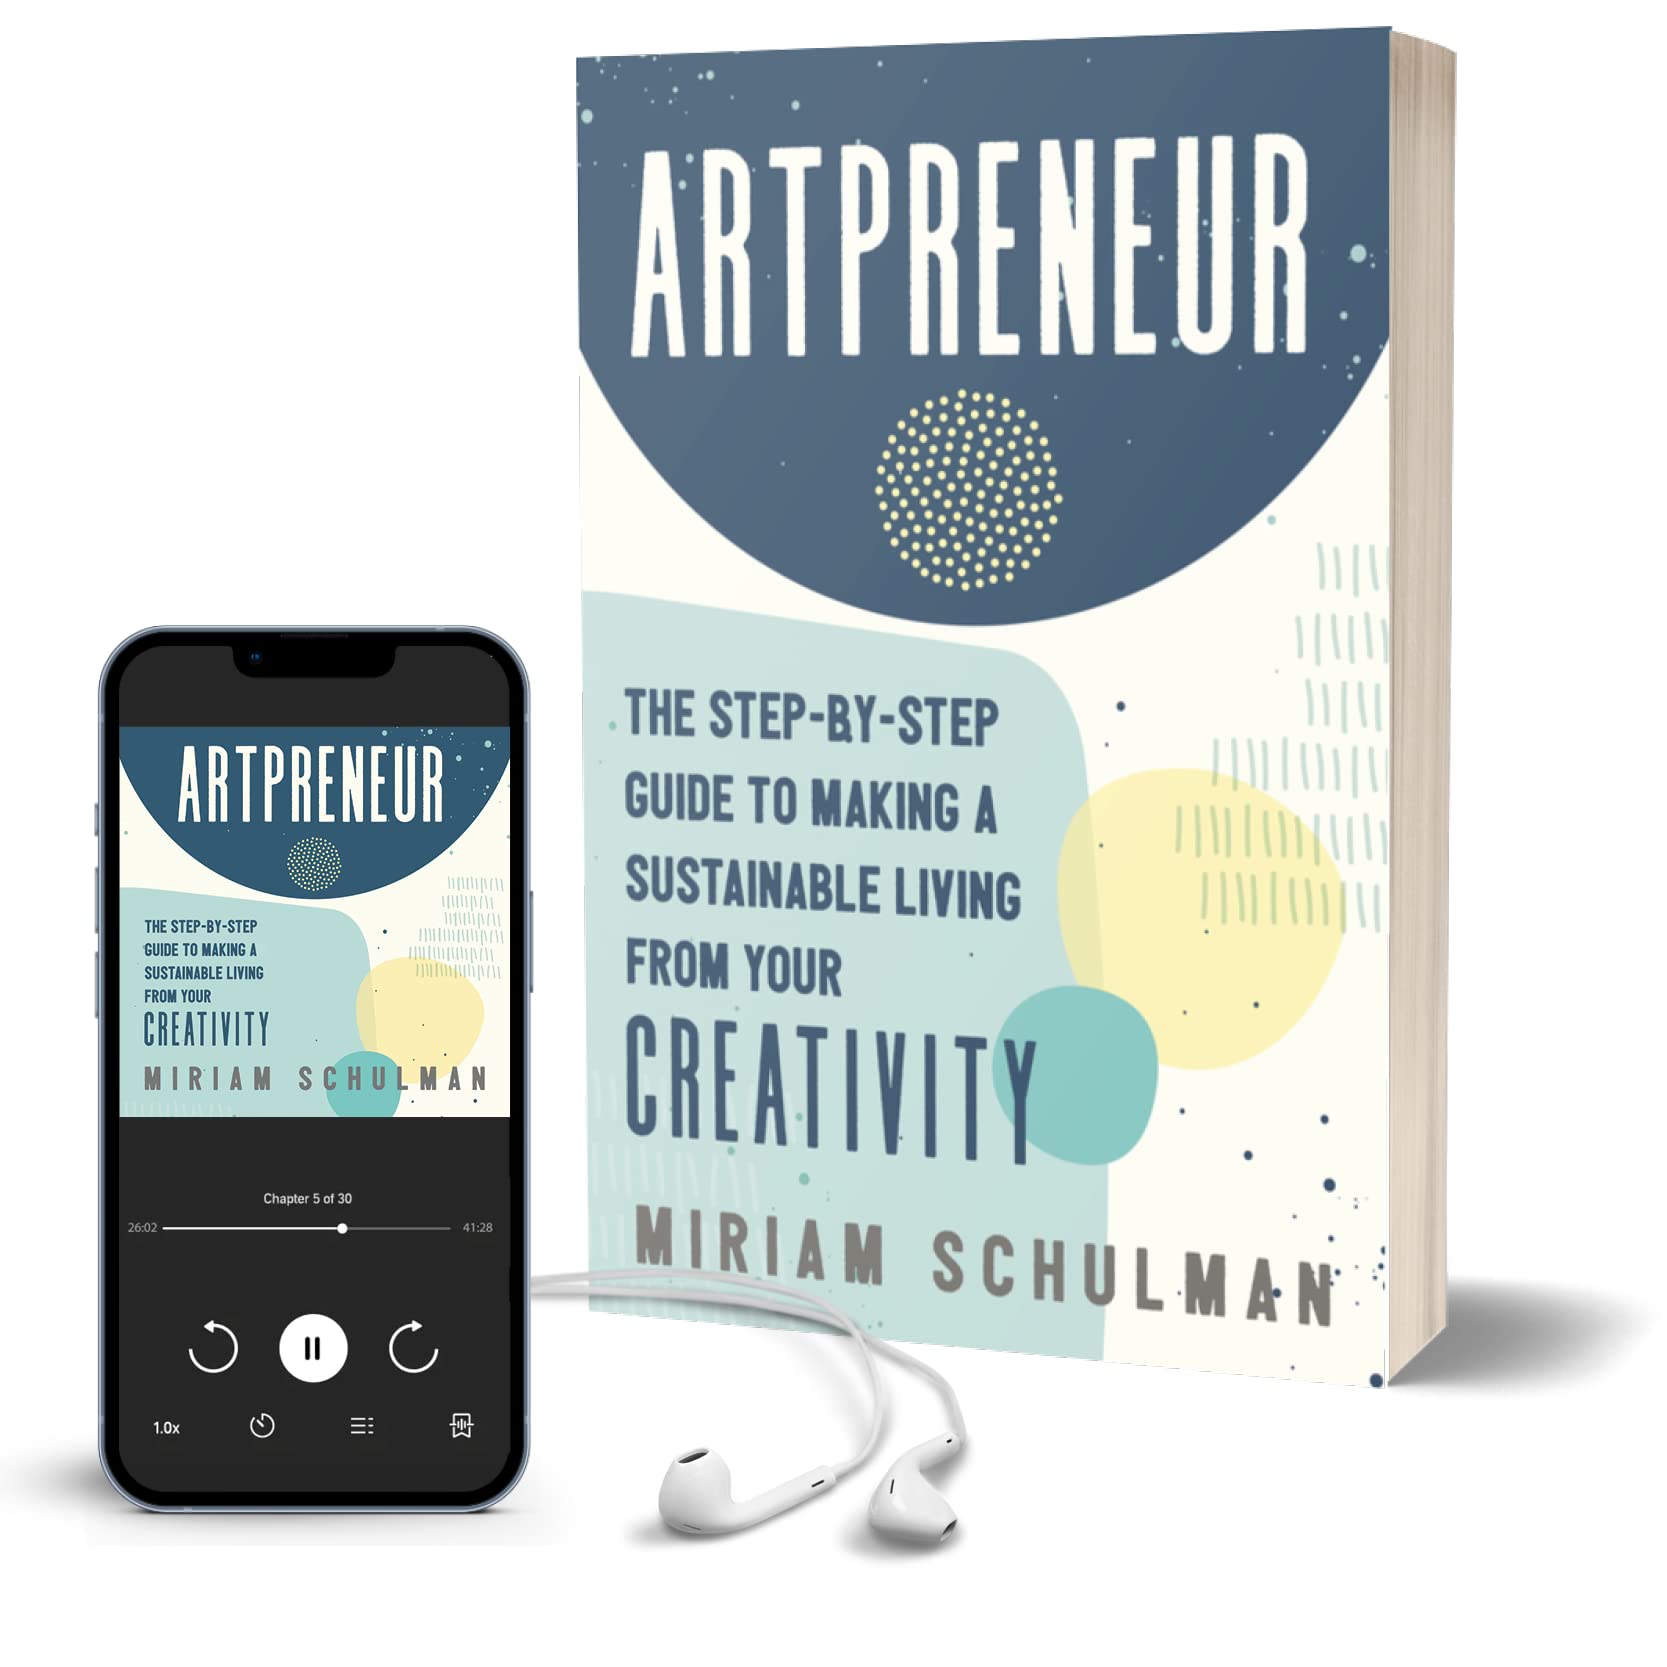 Artpreneur: The Step-by-Step Guide to Making a Sustainable Living from Your Creativity